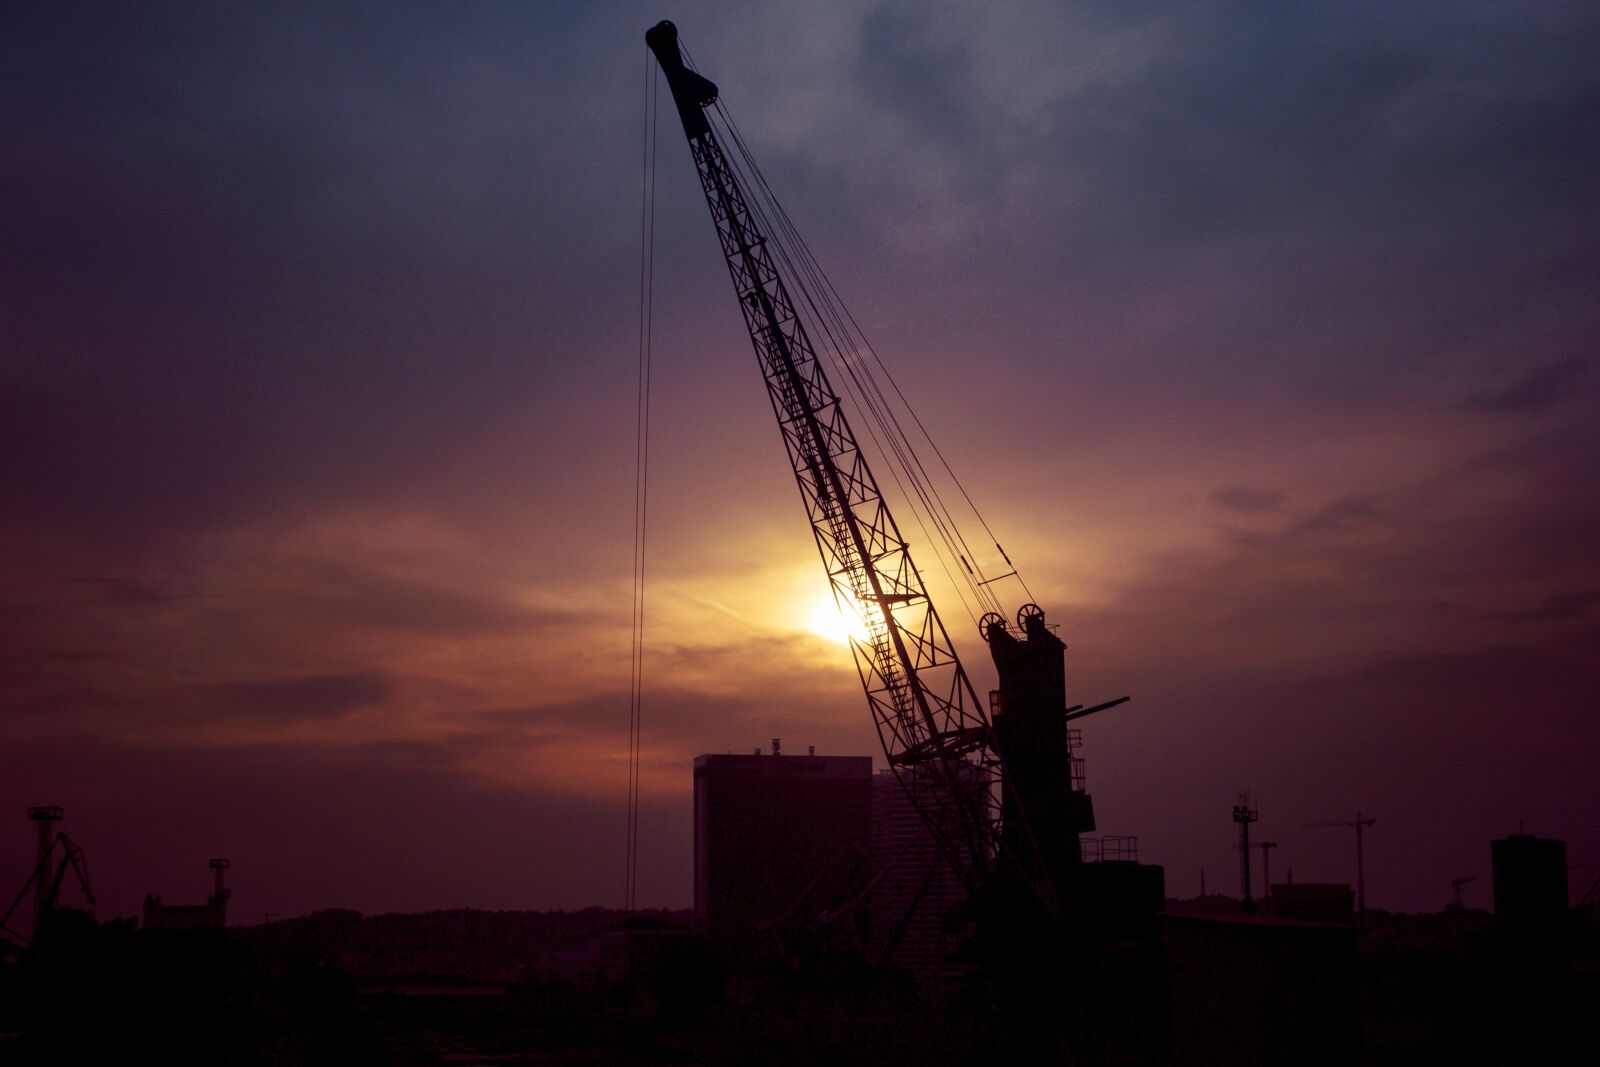 Canon EOS 70D + Sigma 12-24mm f/4.5-5.6 EX DG ASPHERICAL HSM + 1.4x sample photo. Crane, industry, processing photography